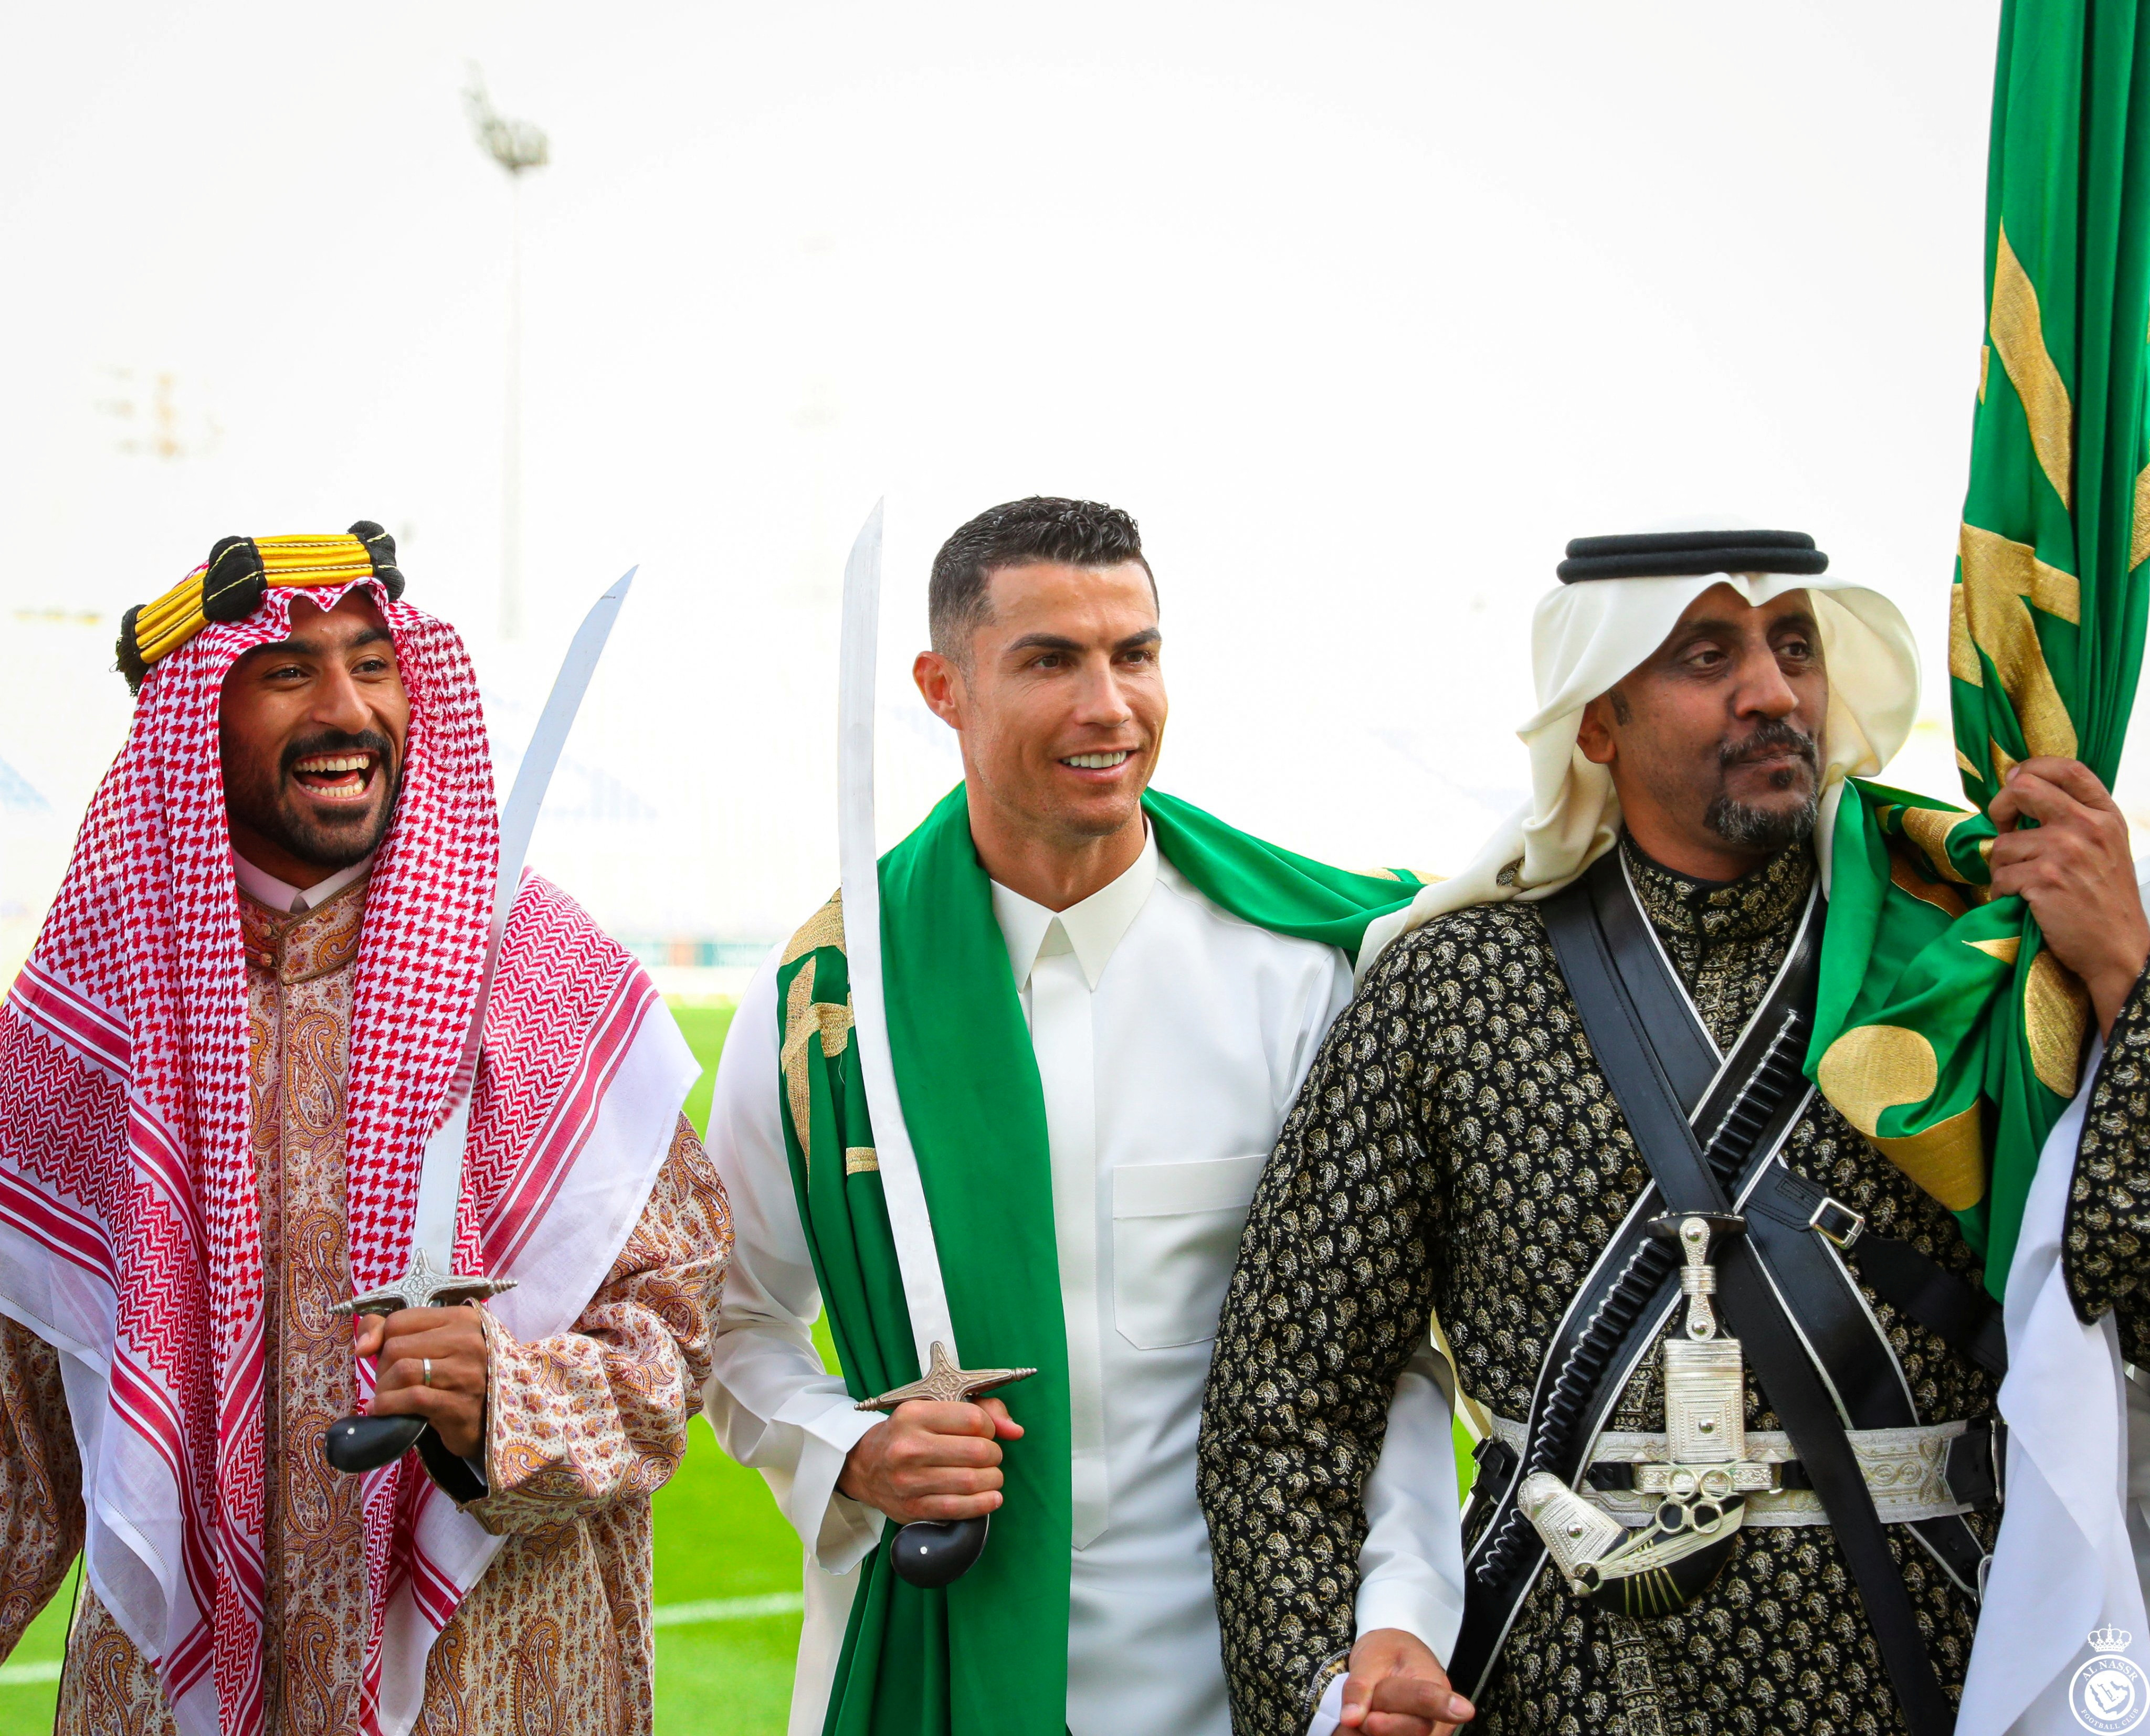 Cristiano Ronaldo celebrates Saudi Arabia's Founding Day with Al-Nassr, donning a sword and traditional garb in the process